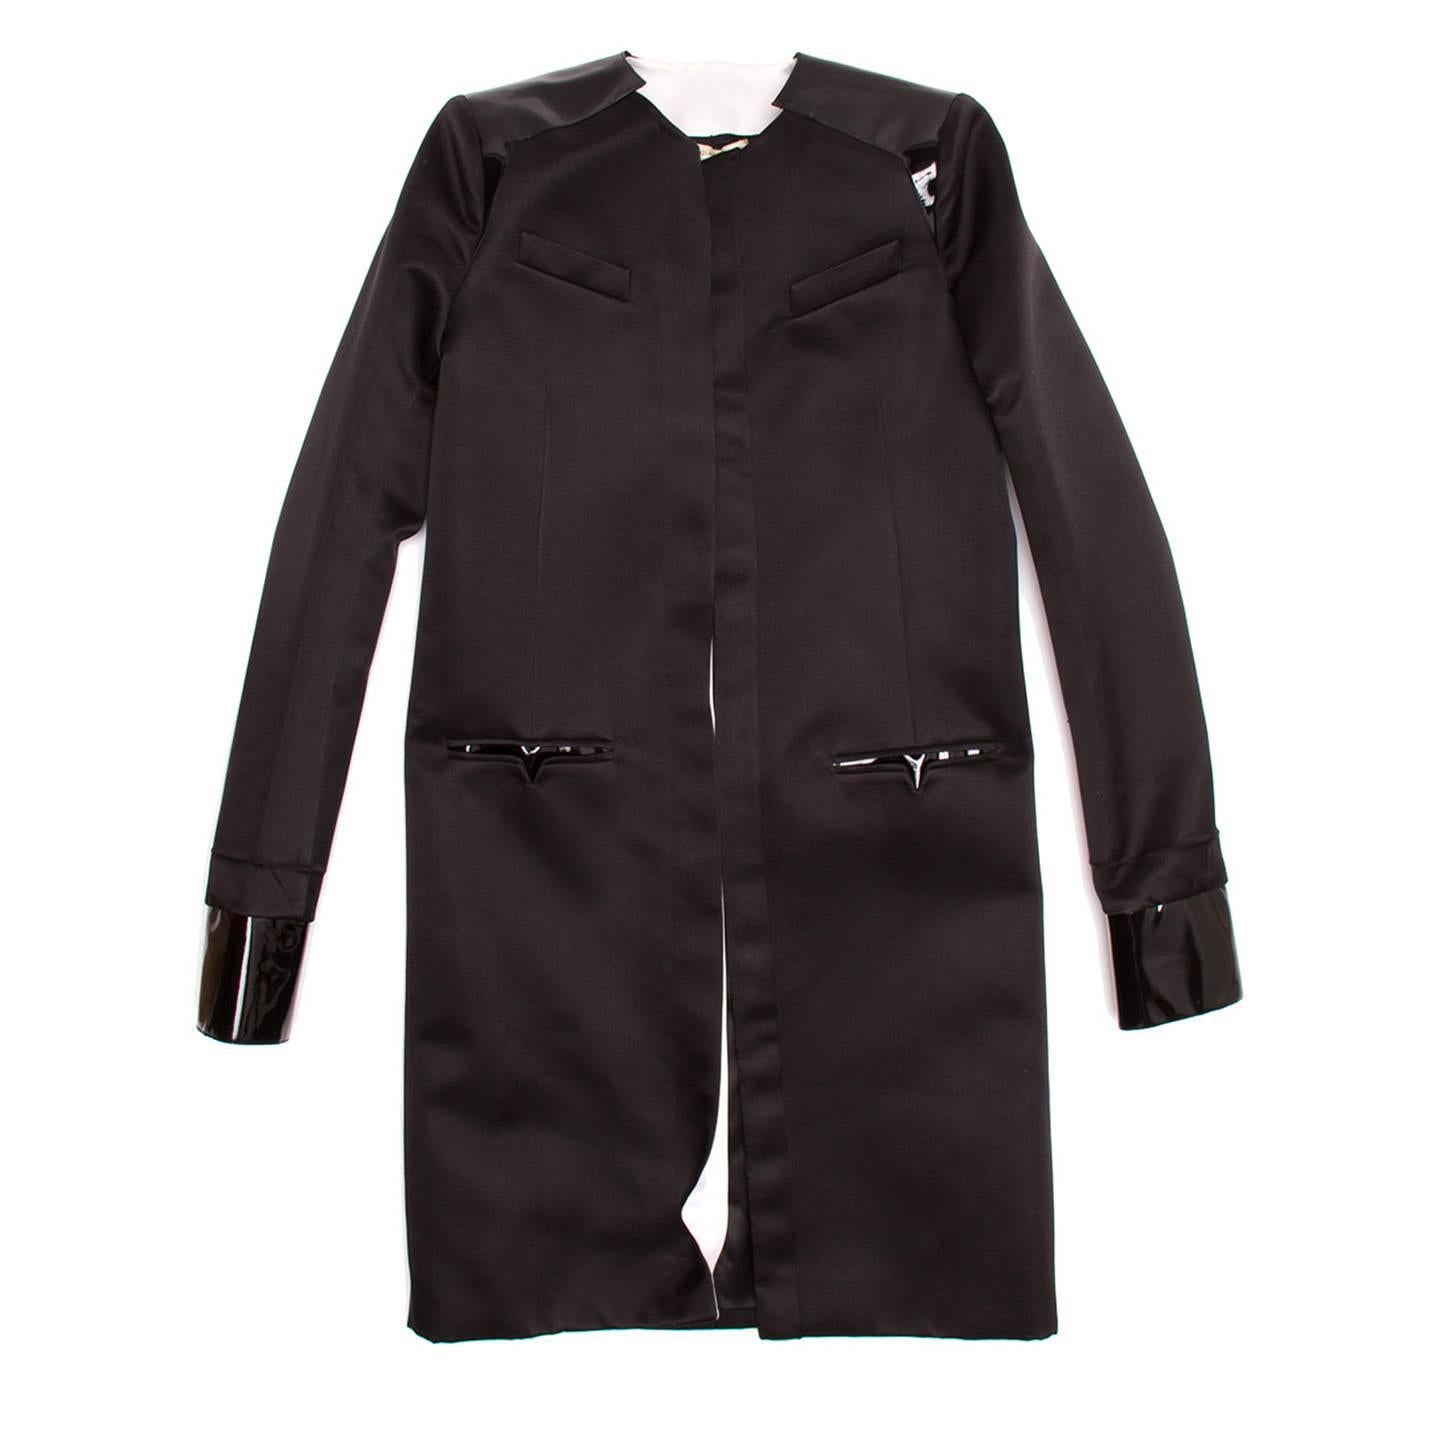 Black silk loose fit overcoat with patent leather detailing on cuffs and shoulders.

Size  42 French sizing

Condition  Excellent: never worn with tags